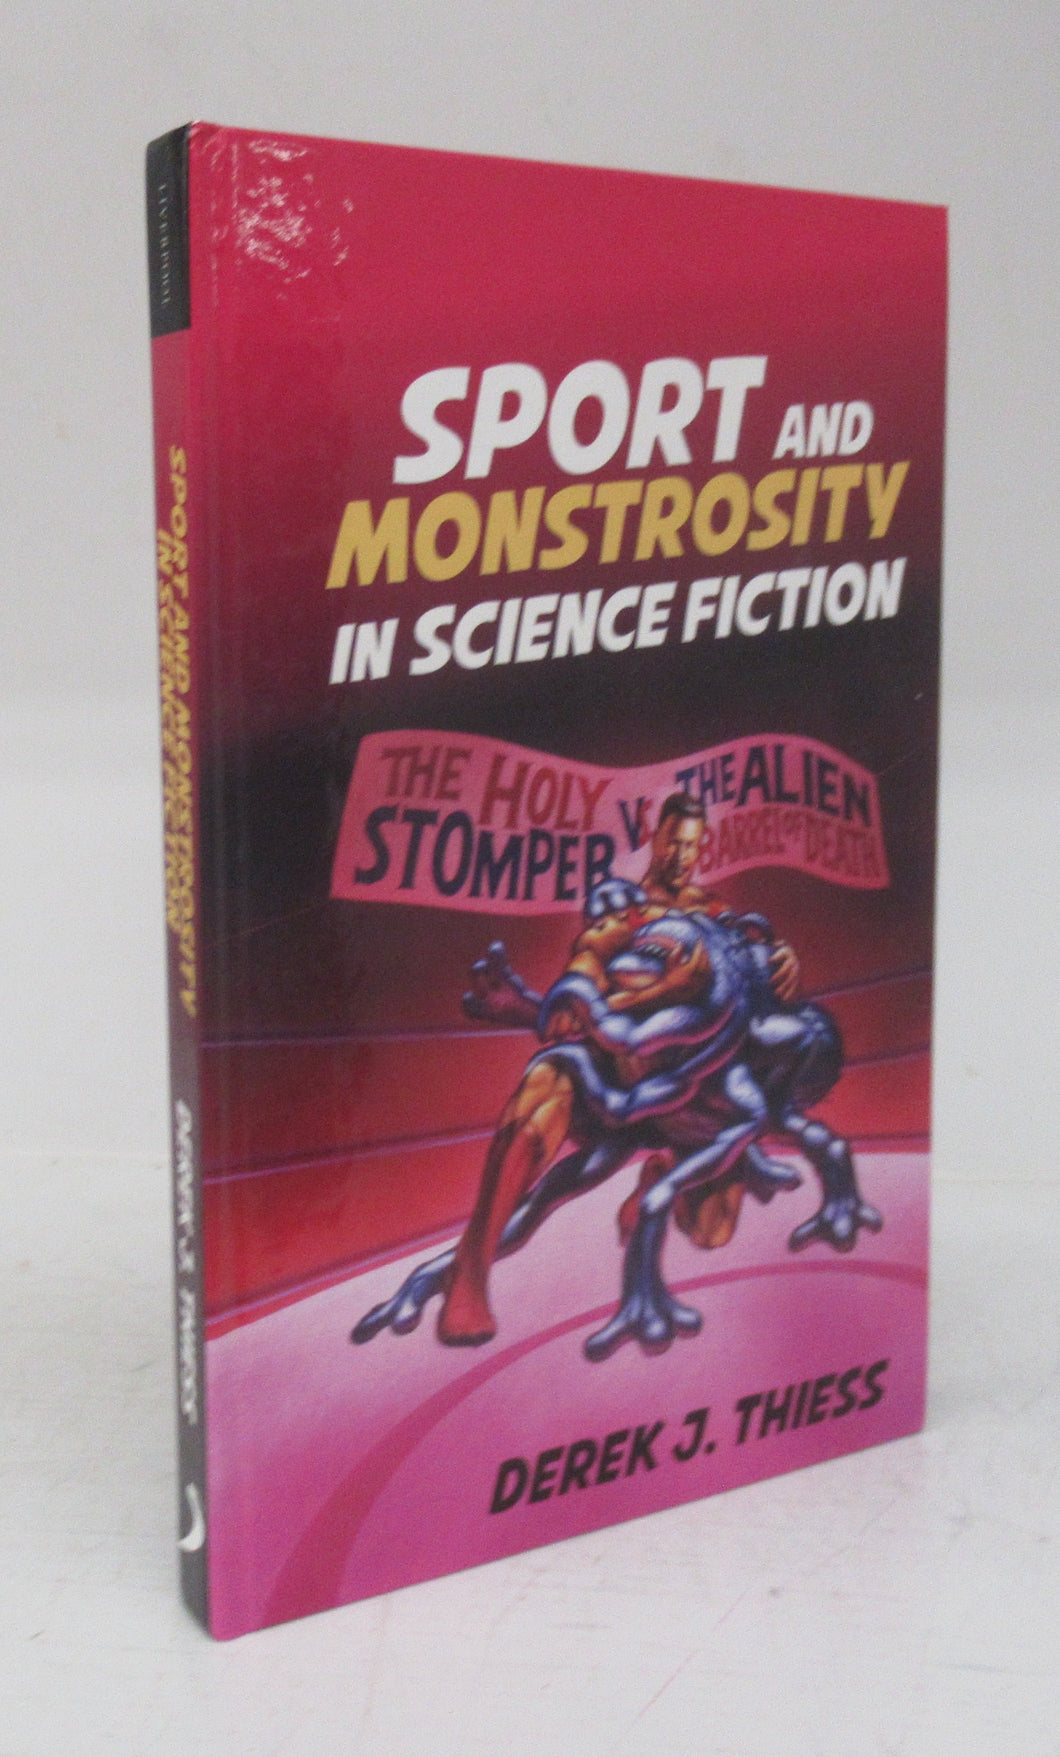 Sport and Monstrosity in Science Fiction